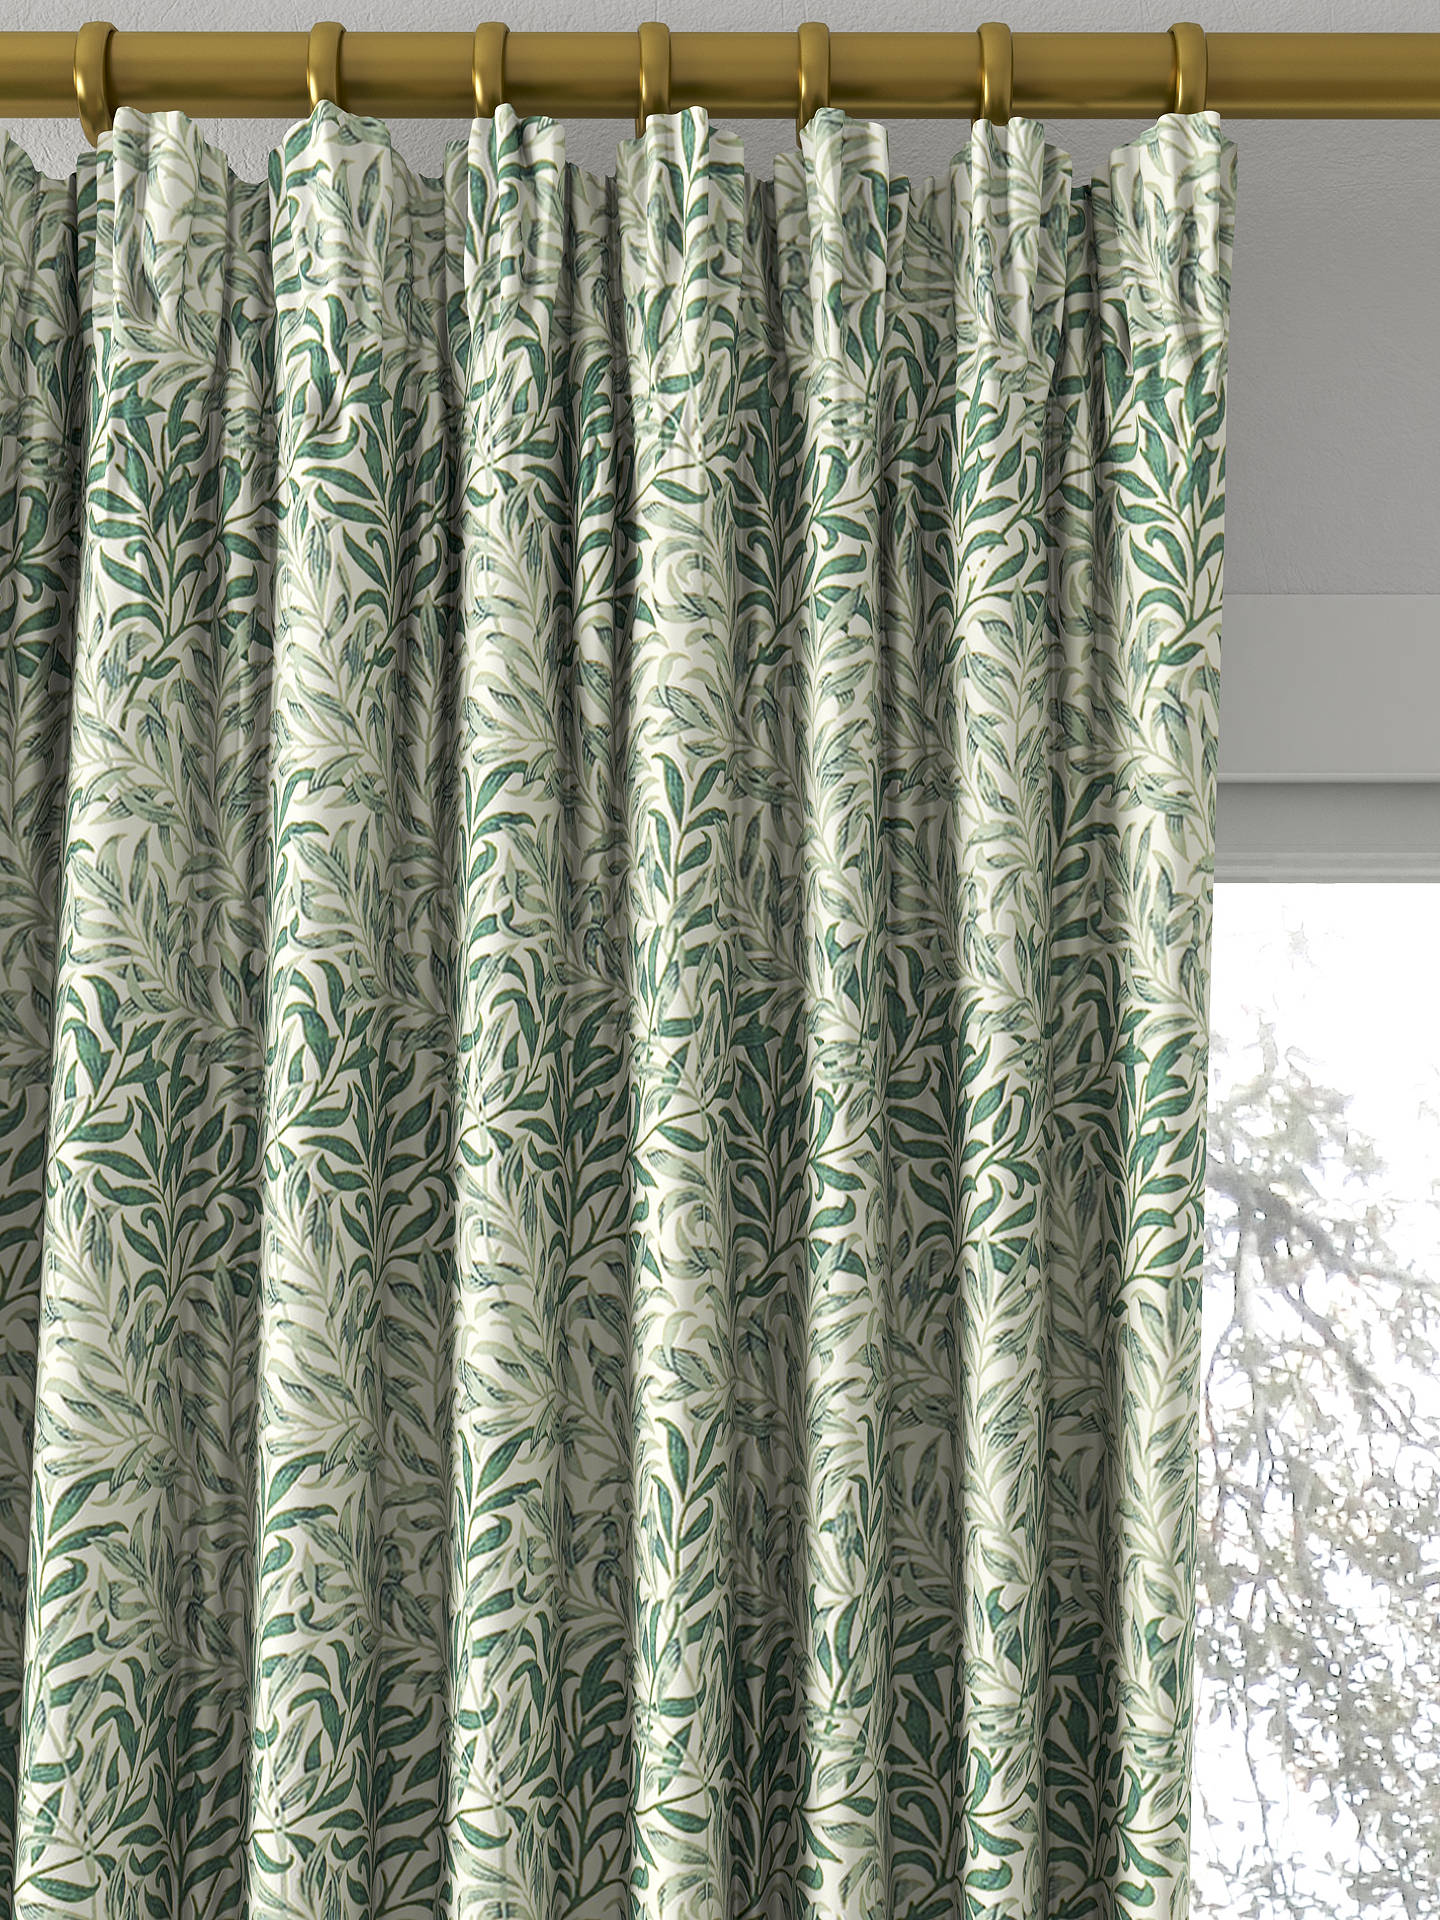 Morris & Co. Willow Boughs Minor Made to Measure Curtains, Forest/Biscuit